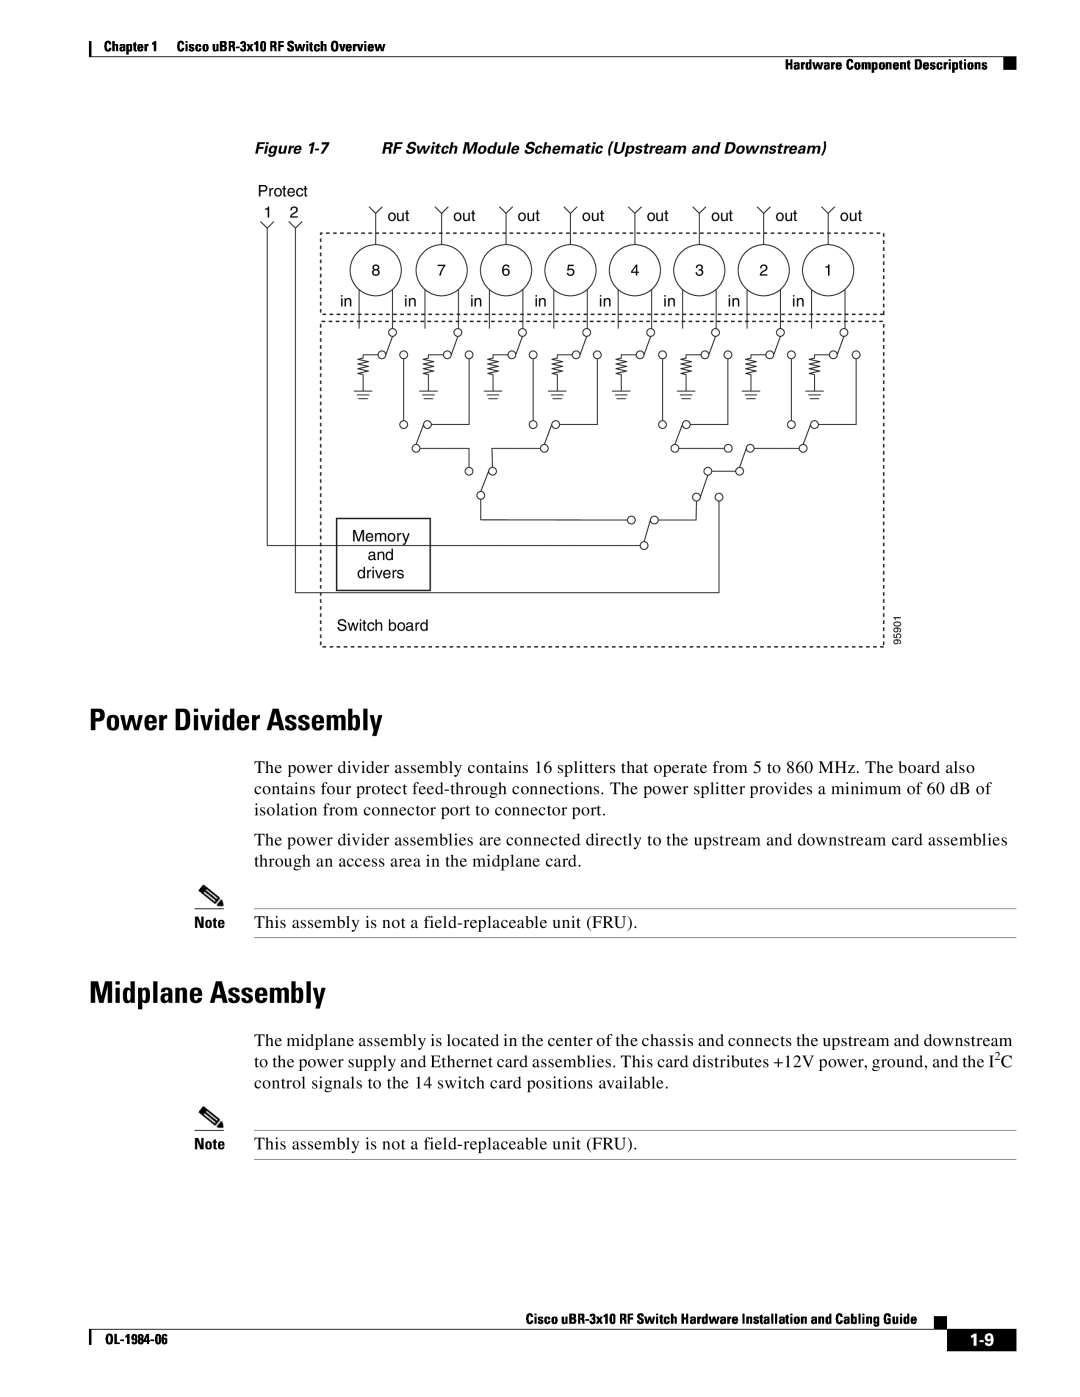 Cisco Systems UBR-3X10 Power Divider Assembly, Midplane Assembly, 7 RF Switch Module Schematic Upstream and Downstream 